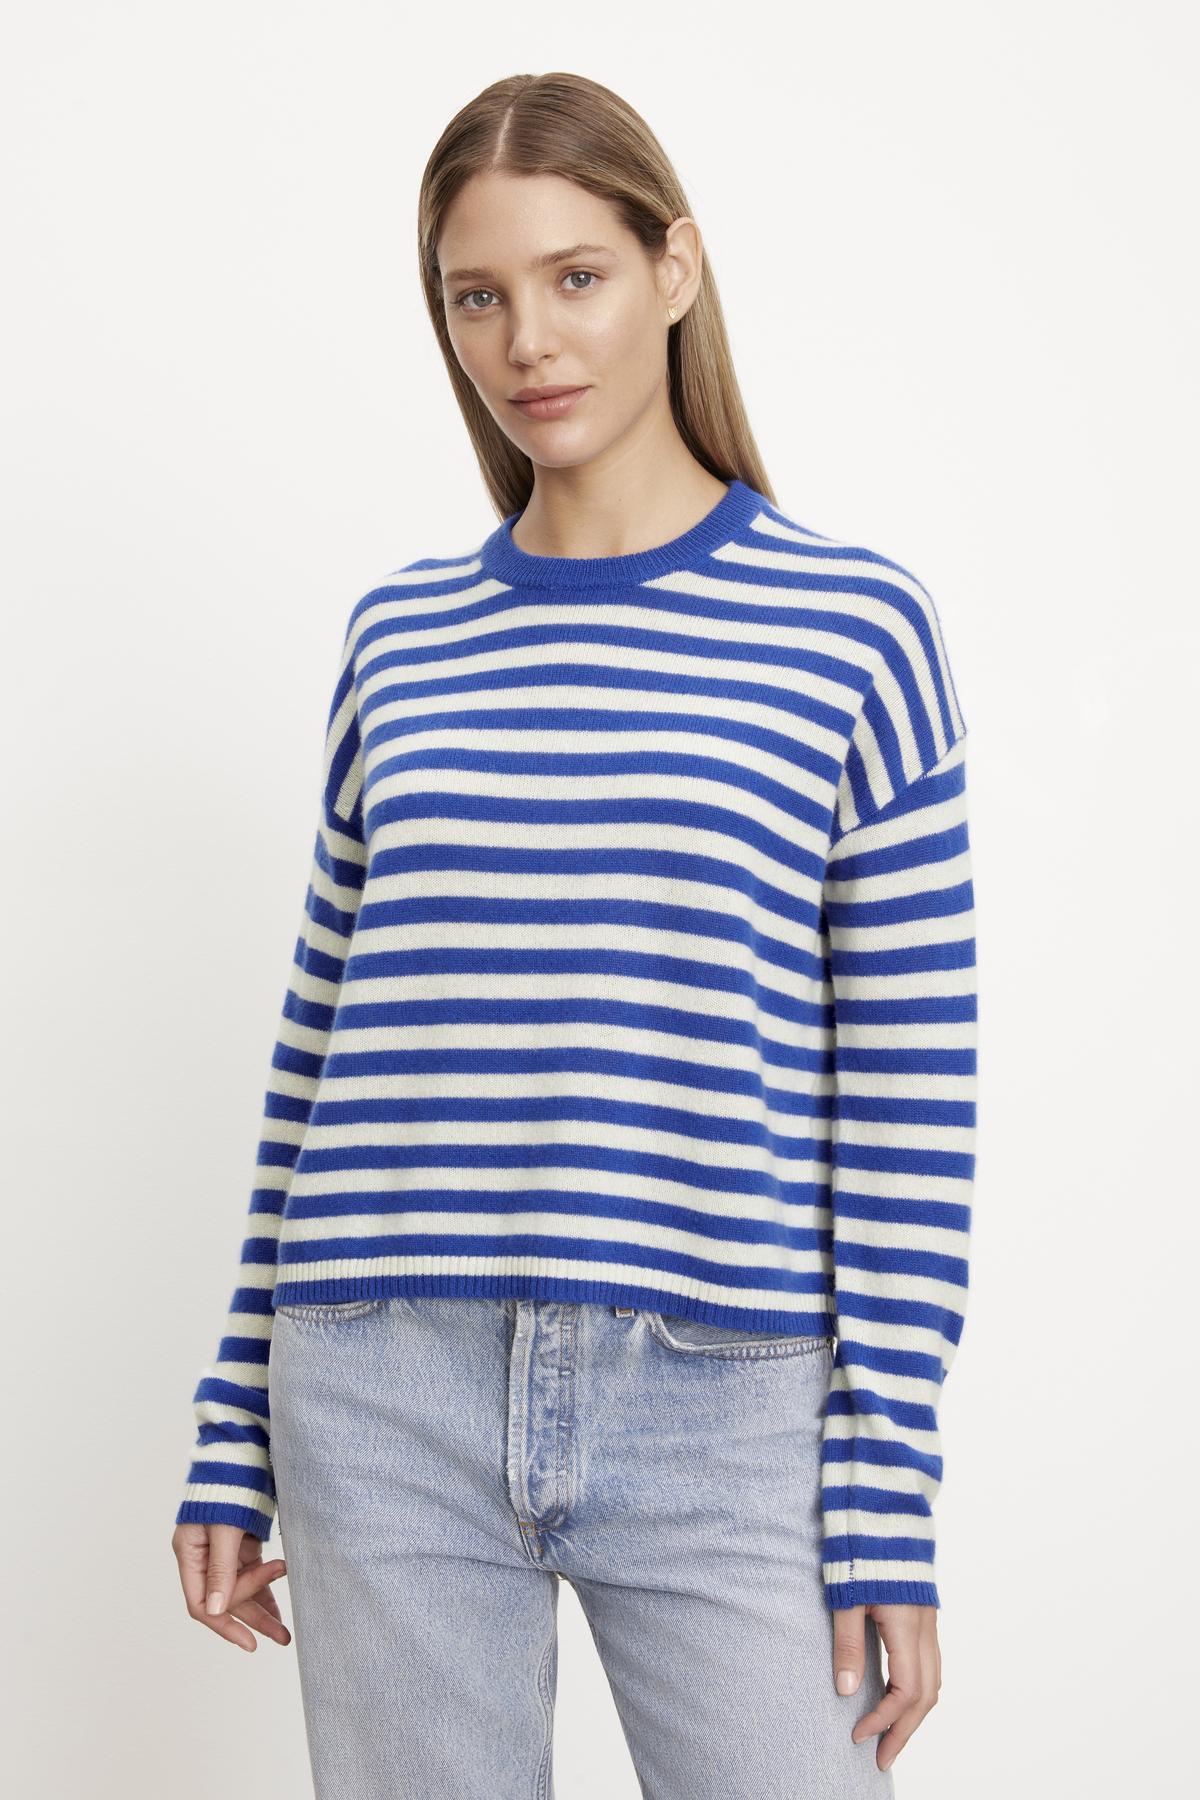 The model is wearing the ALYSSA CASHMERE STRIPED CREW NECK SWEATER from Velvet by Graham & Spencer.-35702033121473